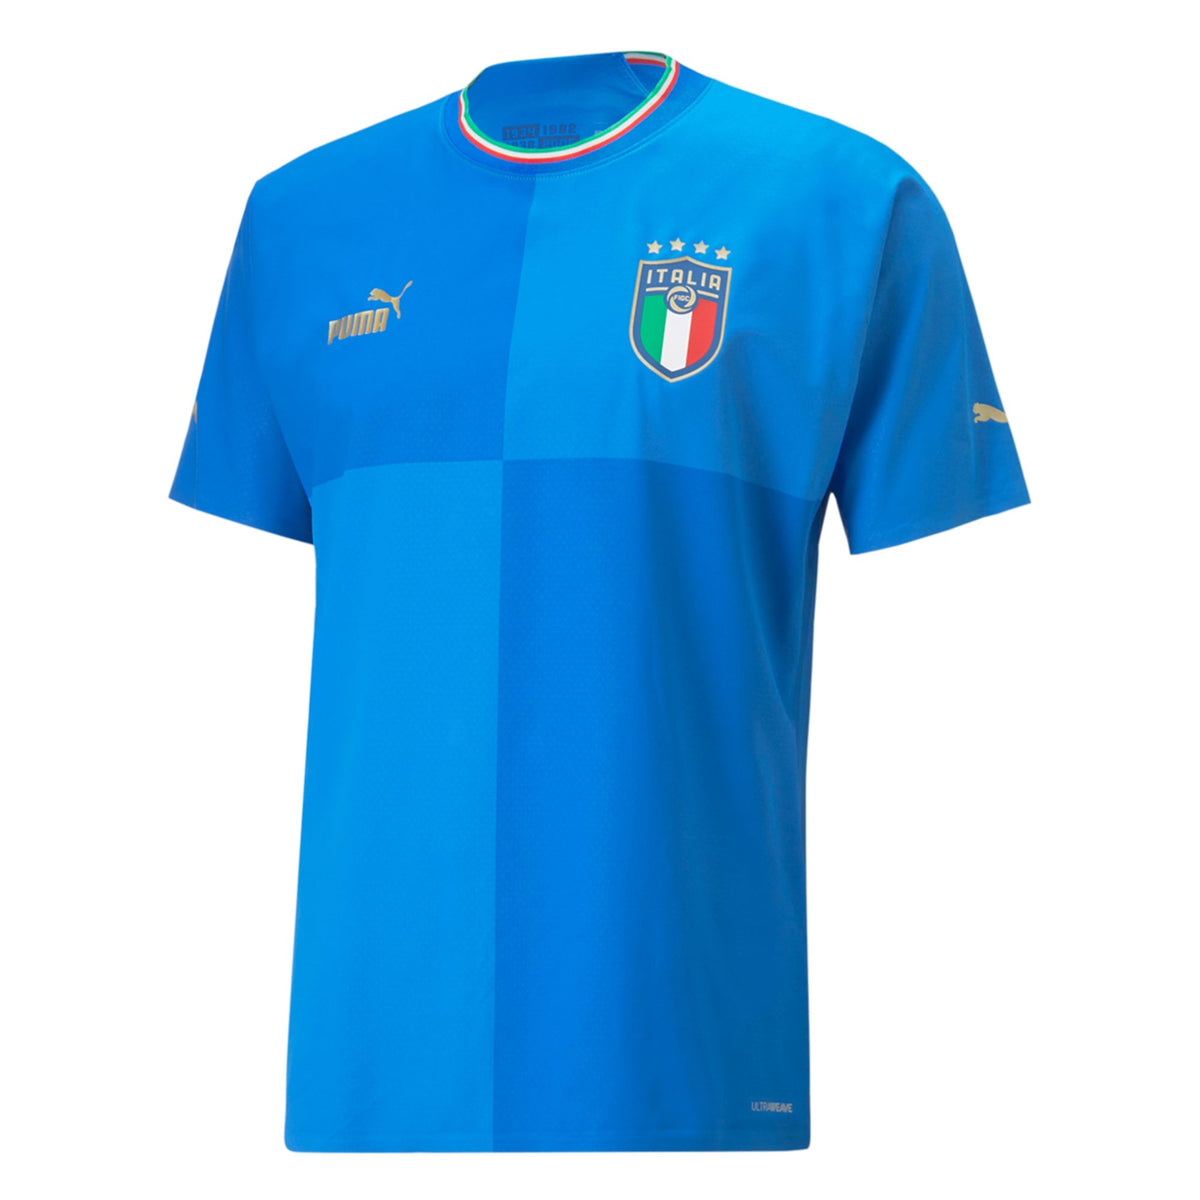 Puma Men's Italy '22 Home Authentic Jersey - L (Large)